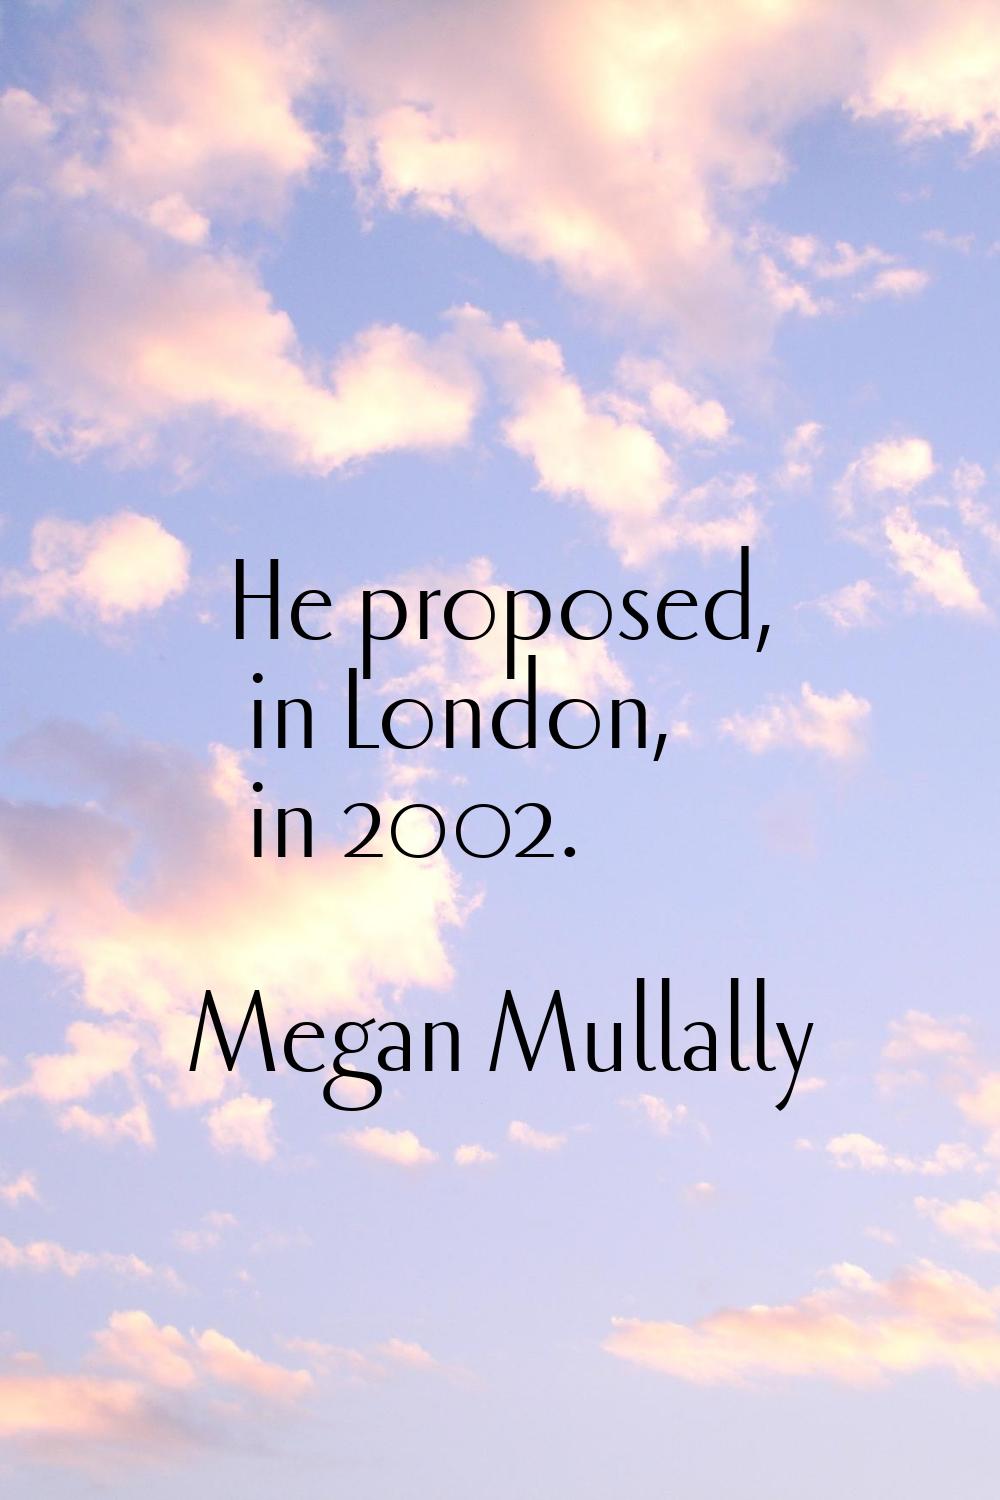 He proposed, in London, in 2002.